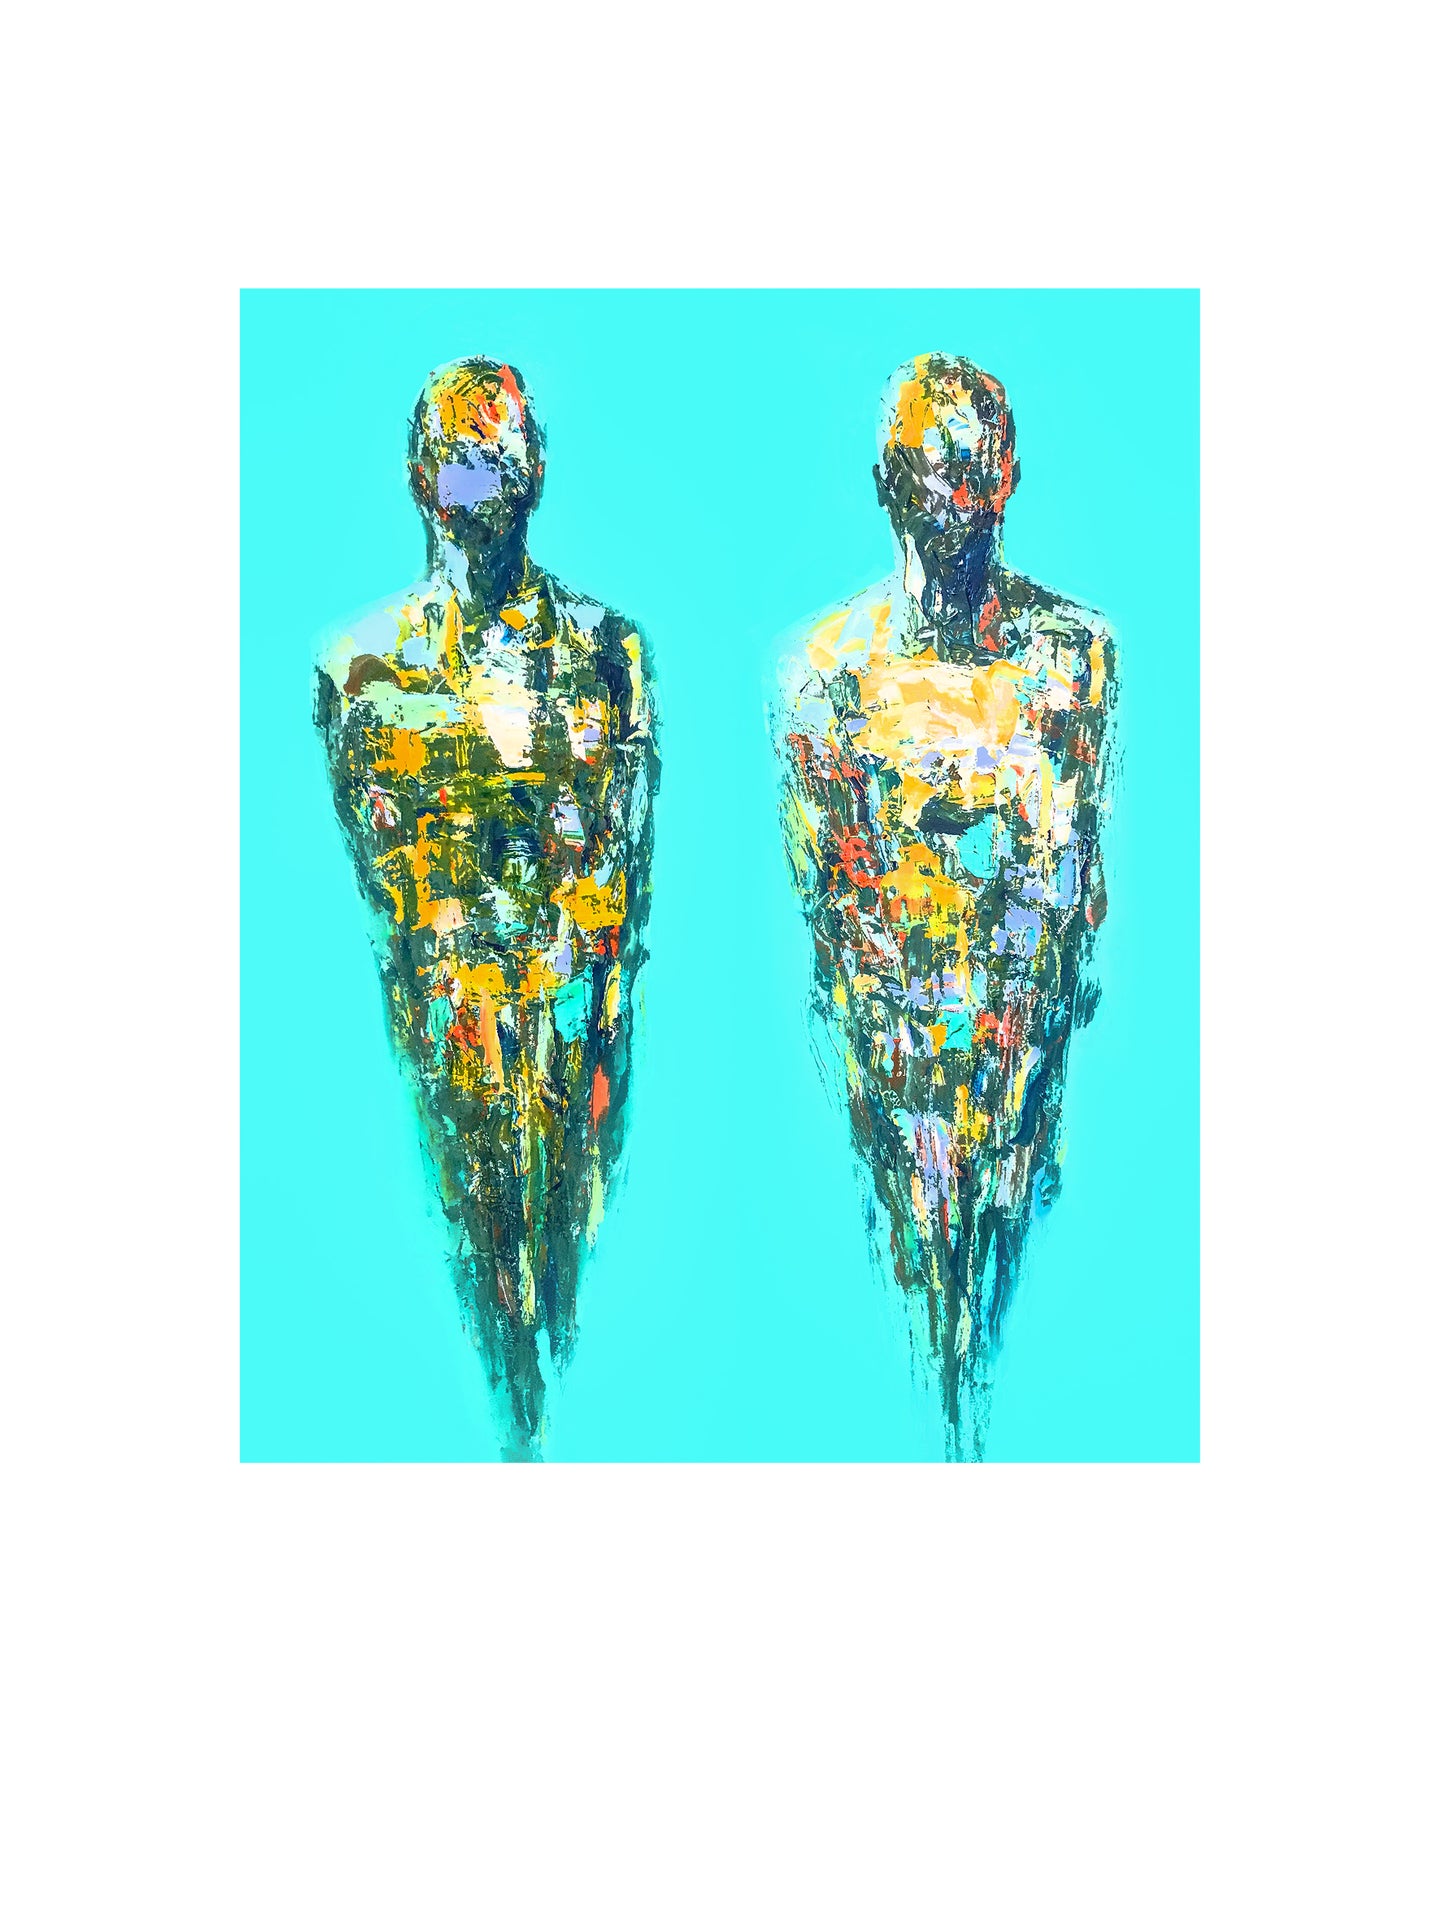 Two Figures no. 02 / 30 x 40 cm